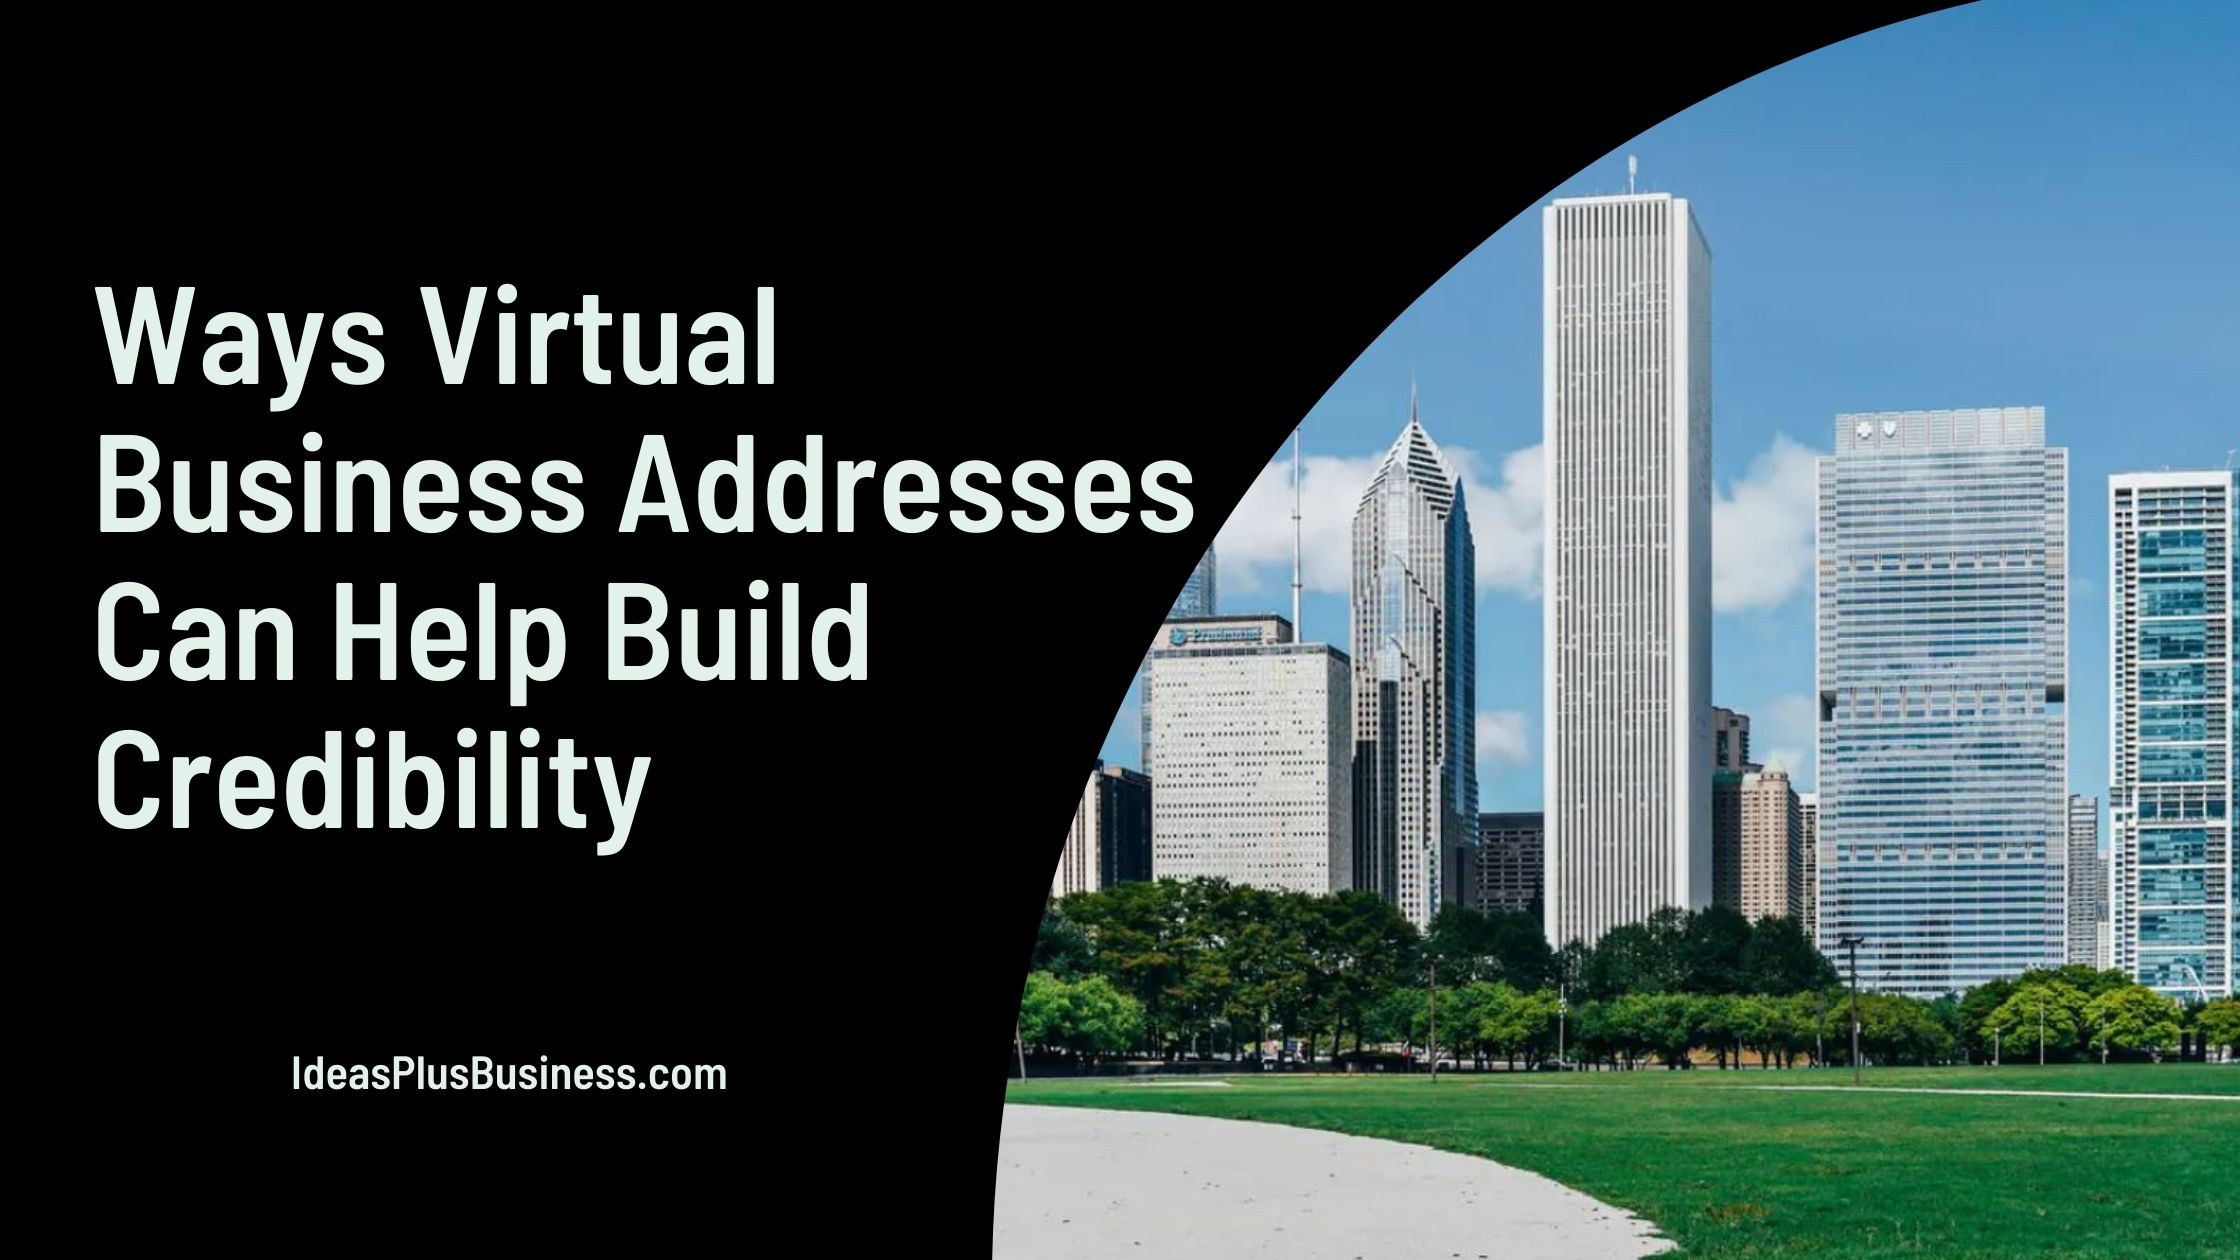 4 Ways Virtual Business Addresses Can Help Build Credibility